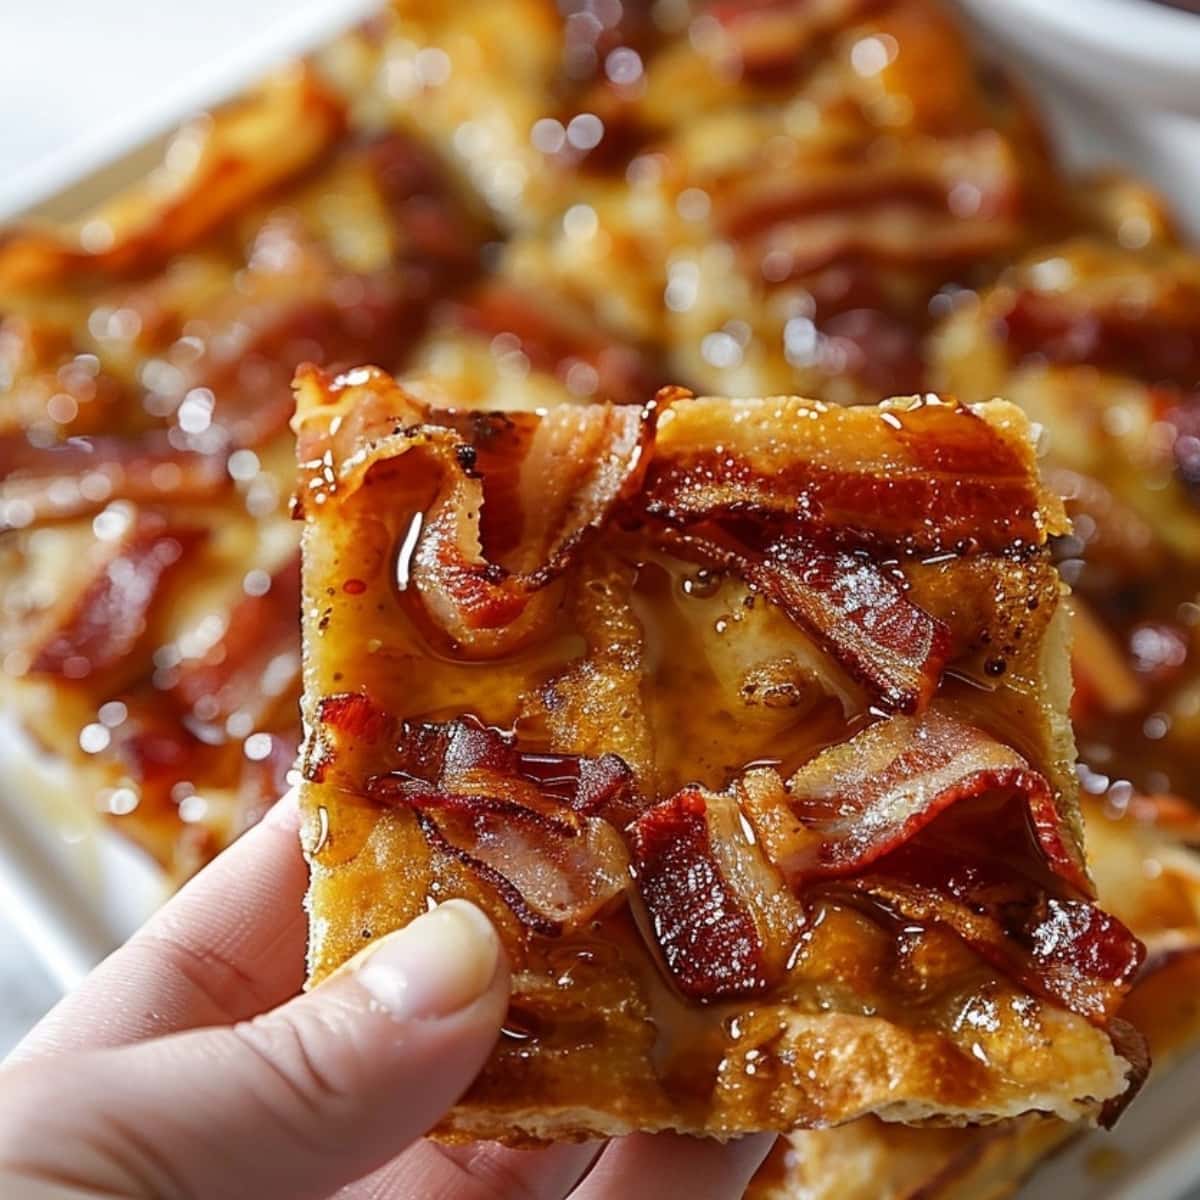 Hand holding a square slice of maple bacon crack.